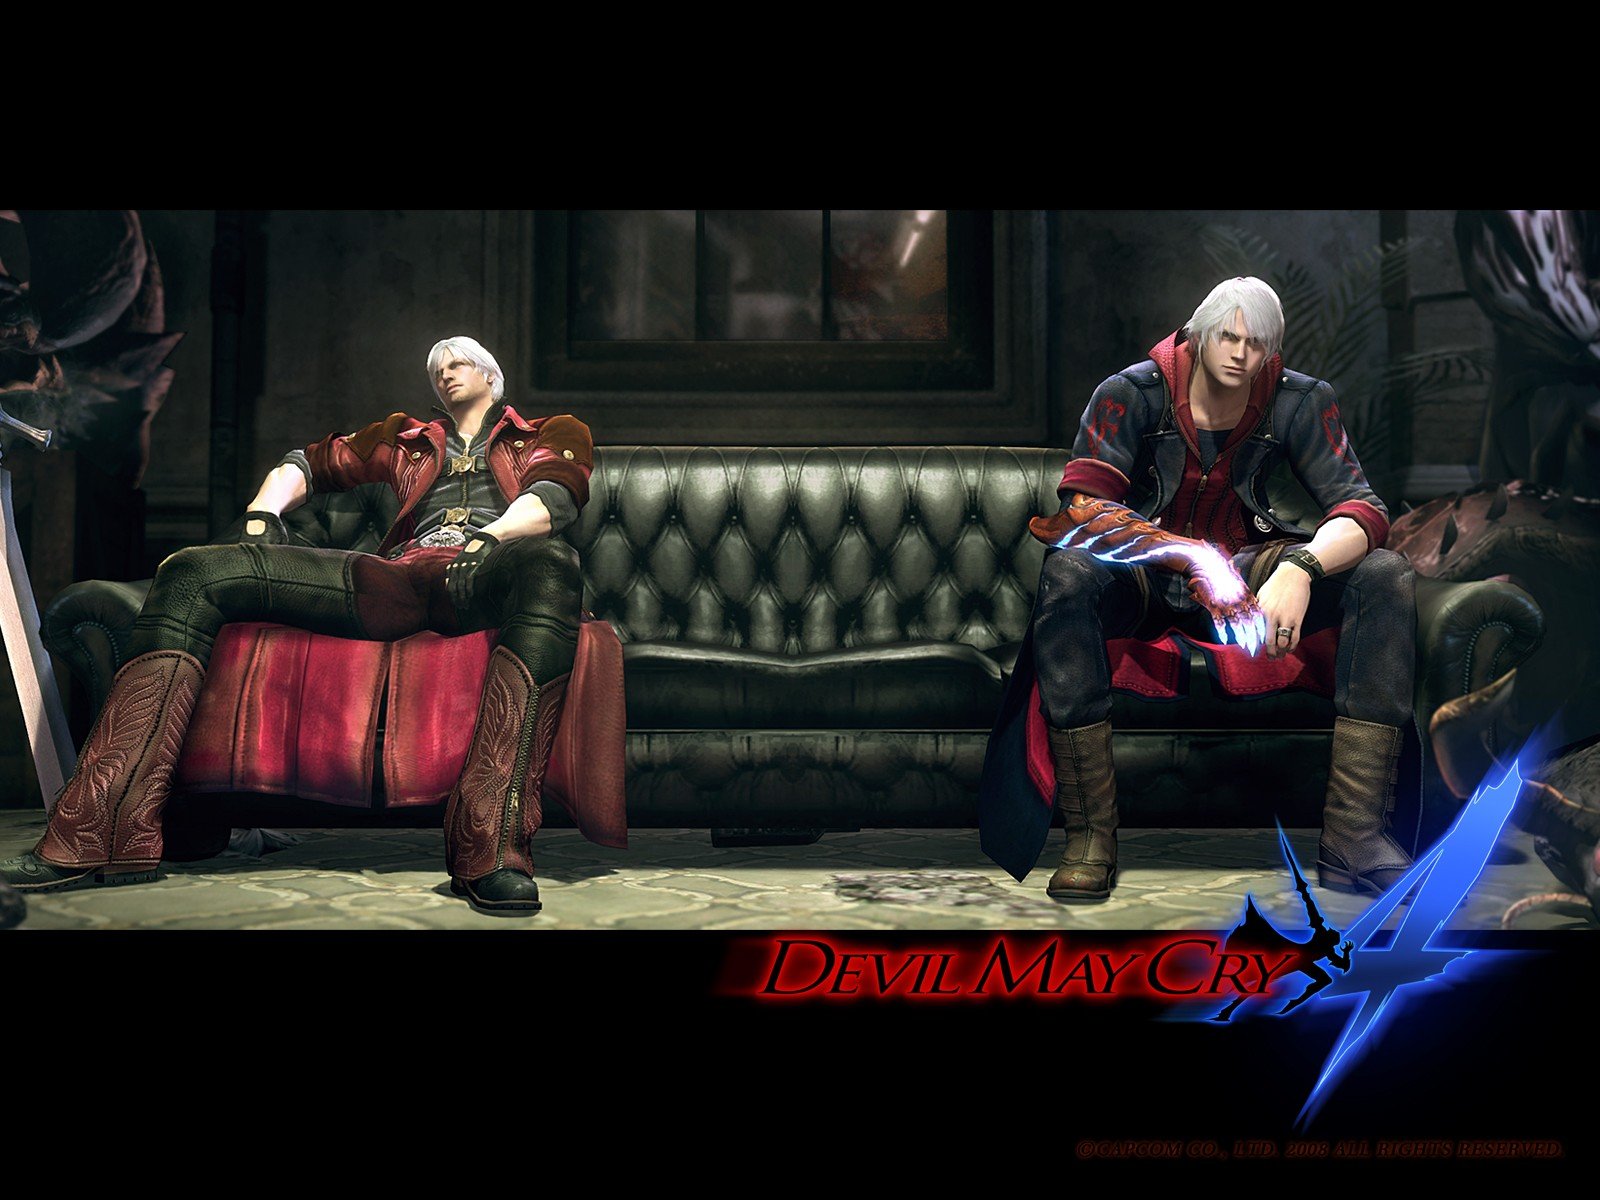 Jogo PC   Devil May Cry 4   RELOADED   [Feh]   The Anony Bay   O 1600x1200